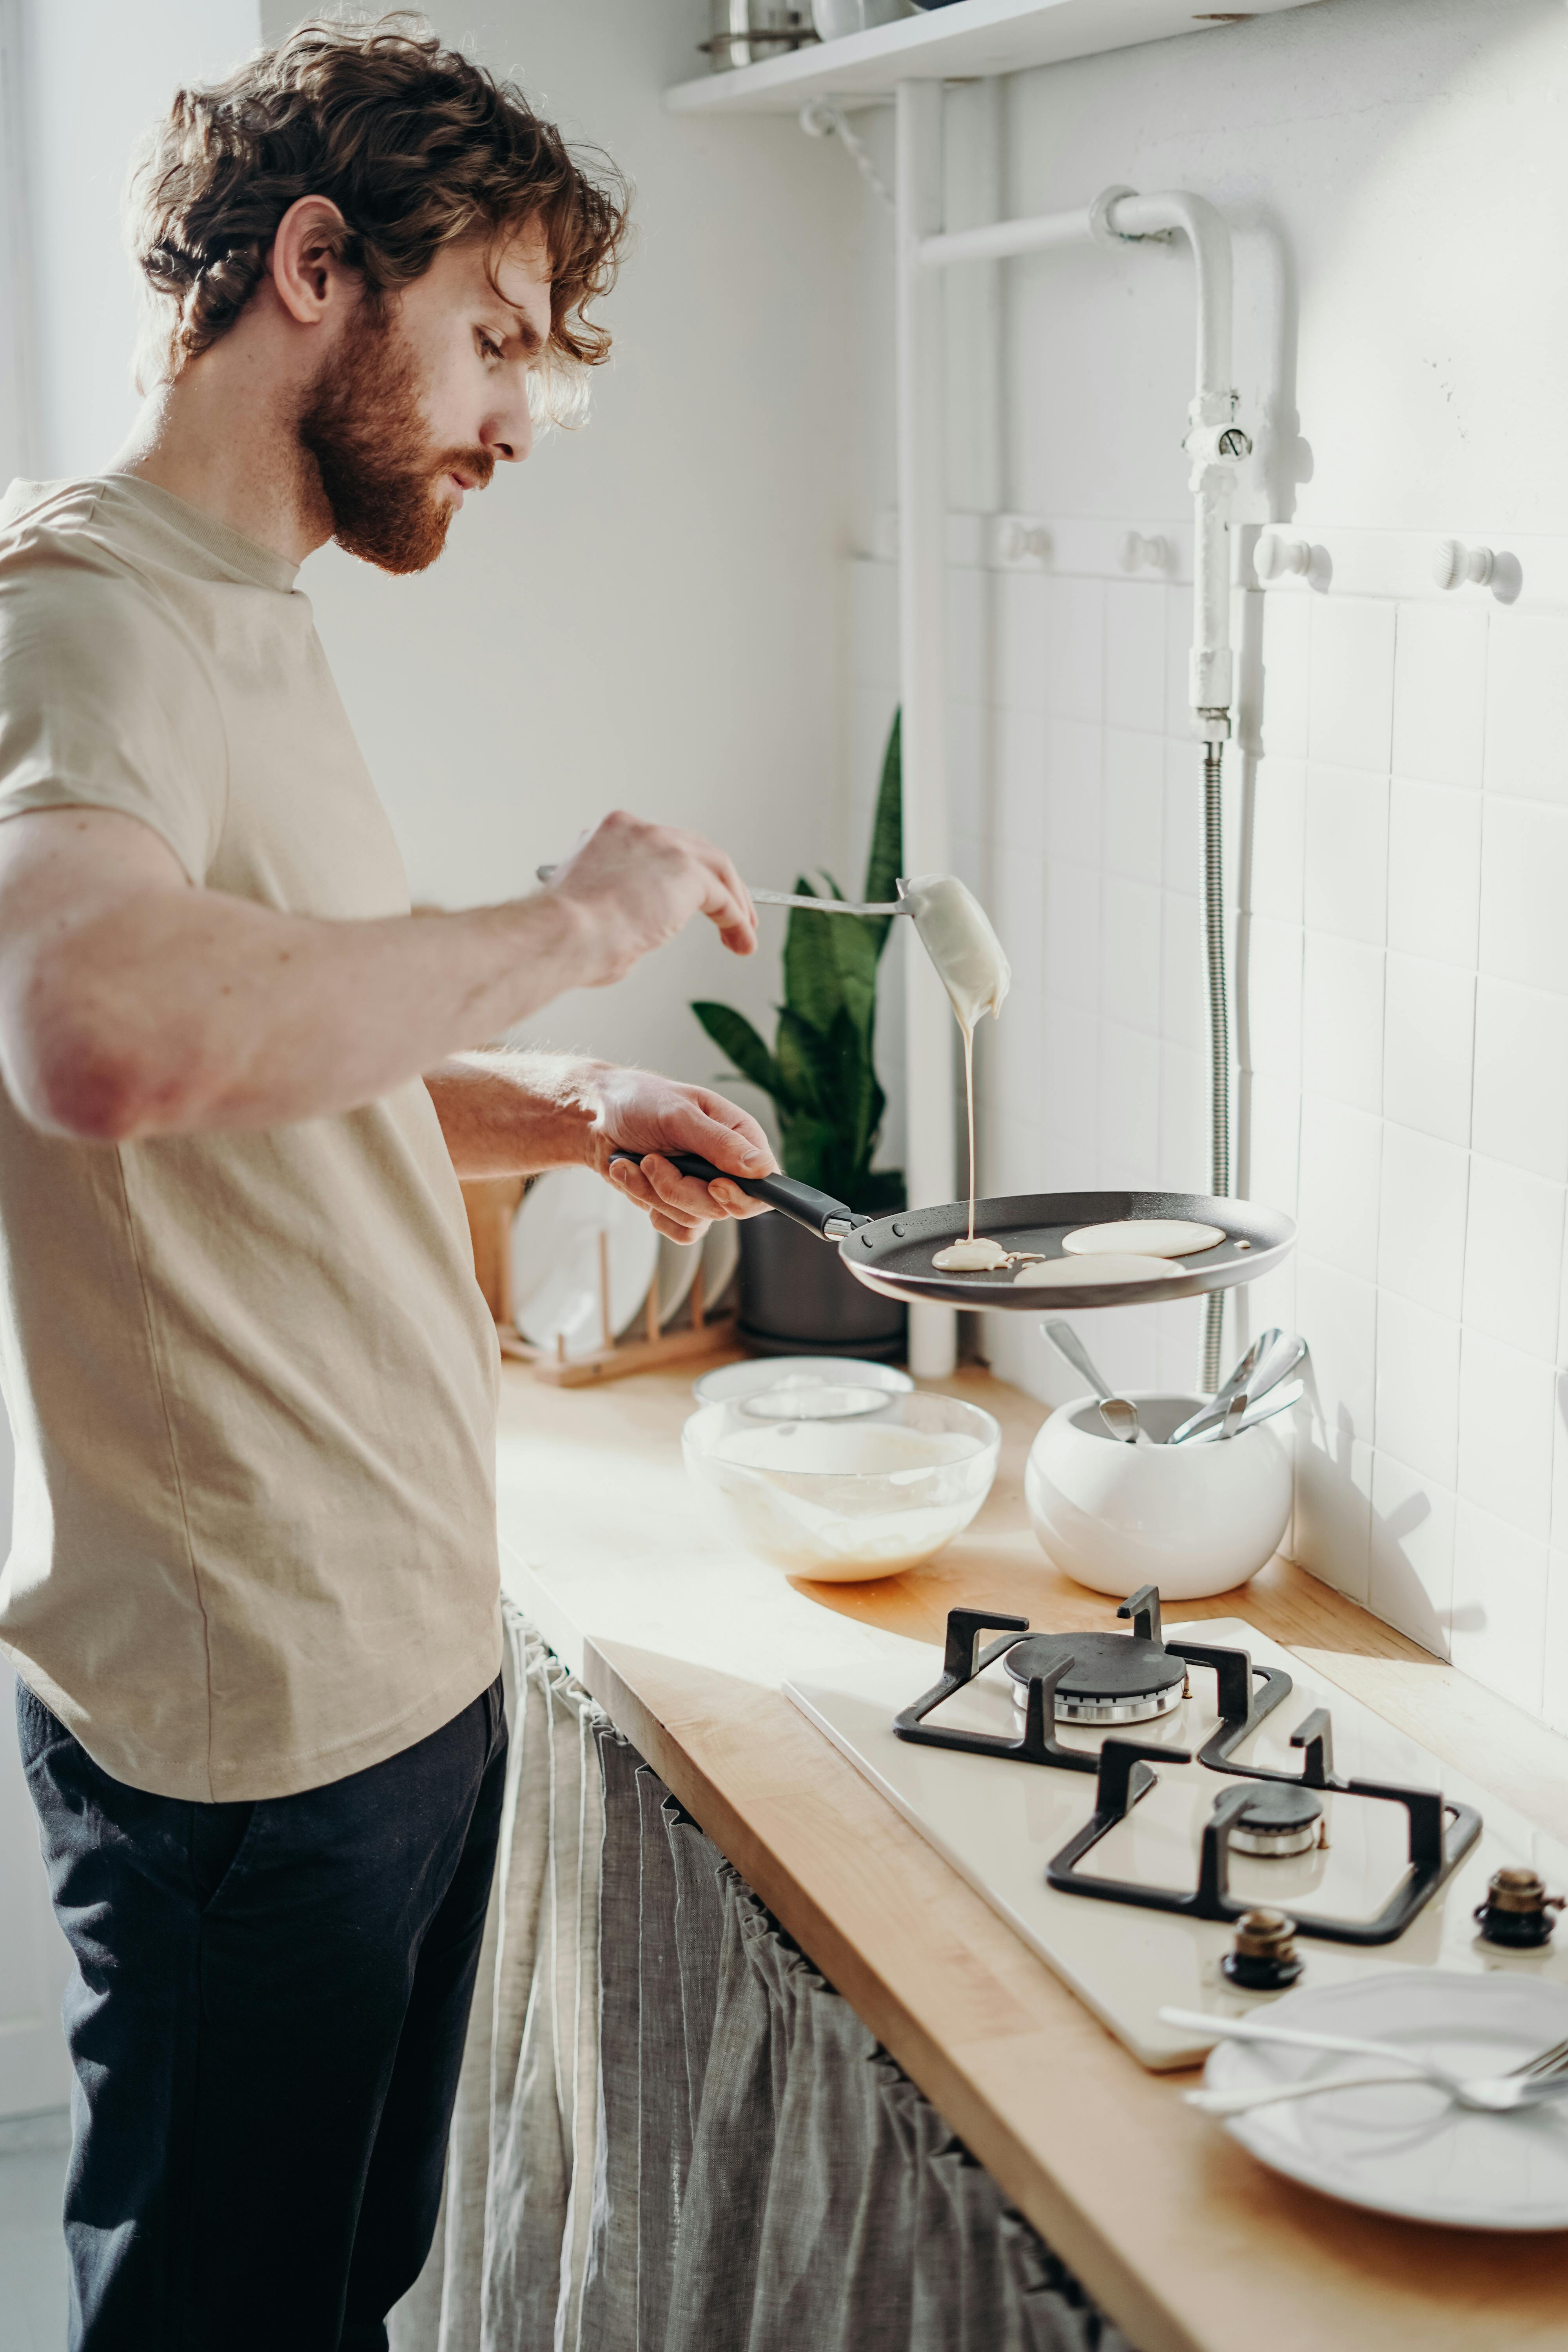 A man making a meal at a stove | Source: Pexels